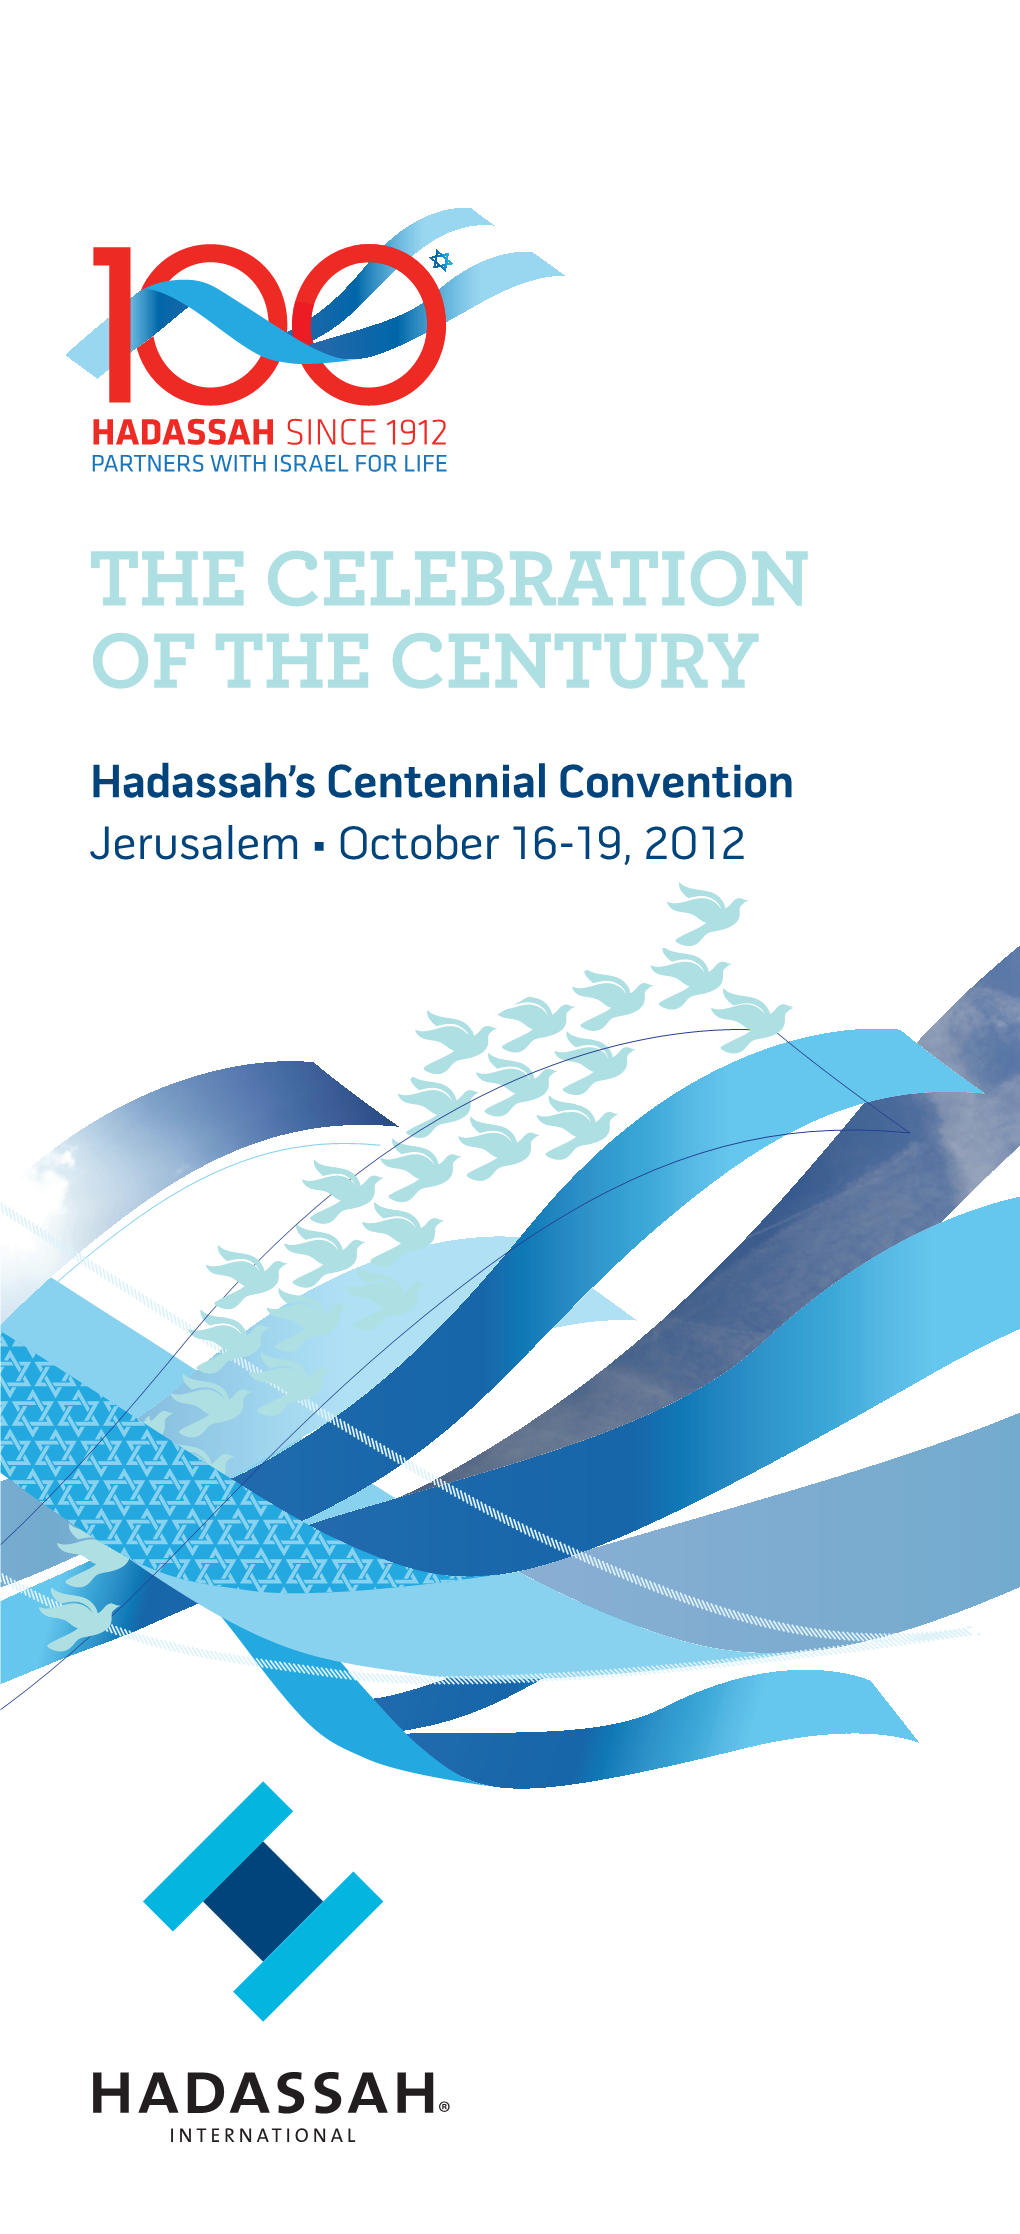 THE CELEBRATION of the CENTURY Hadassah’S Centennial Convention Jerusalem • October 16-19, 2012 Letter from Sherry Altura